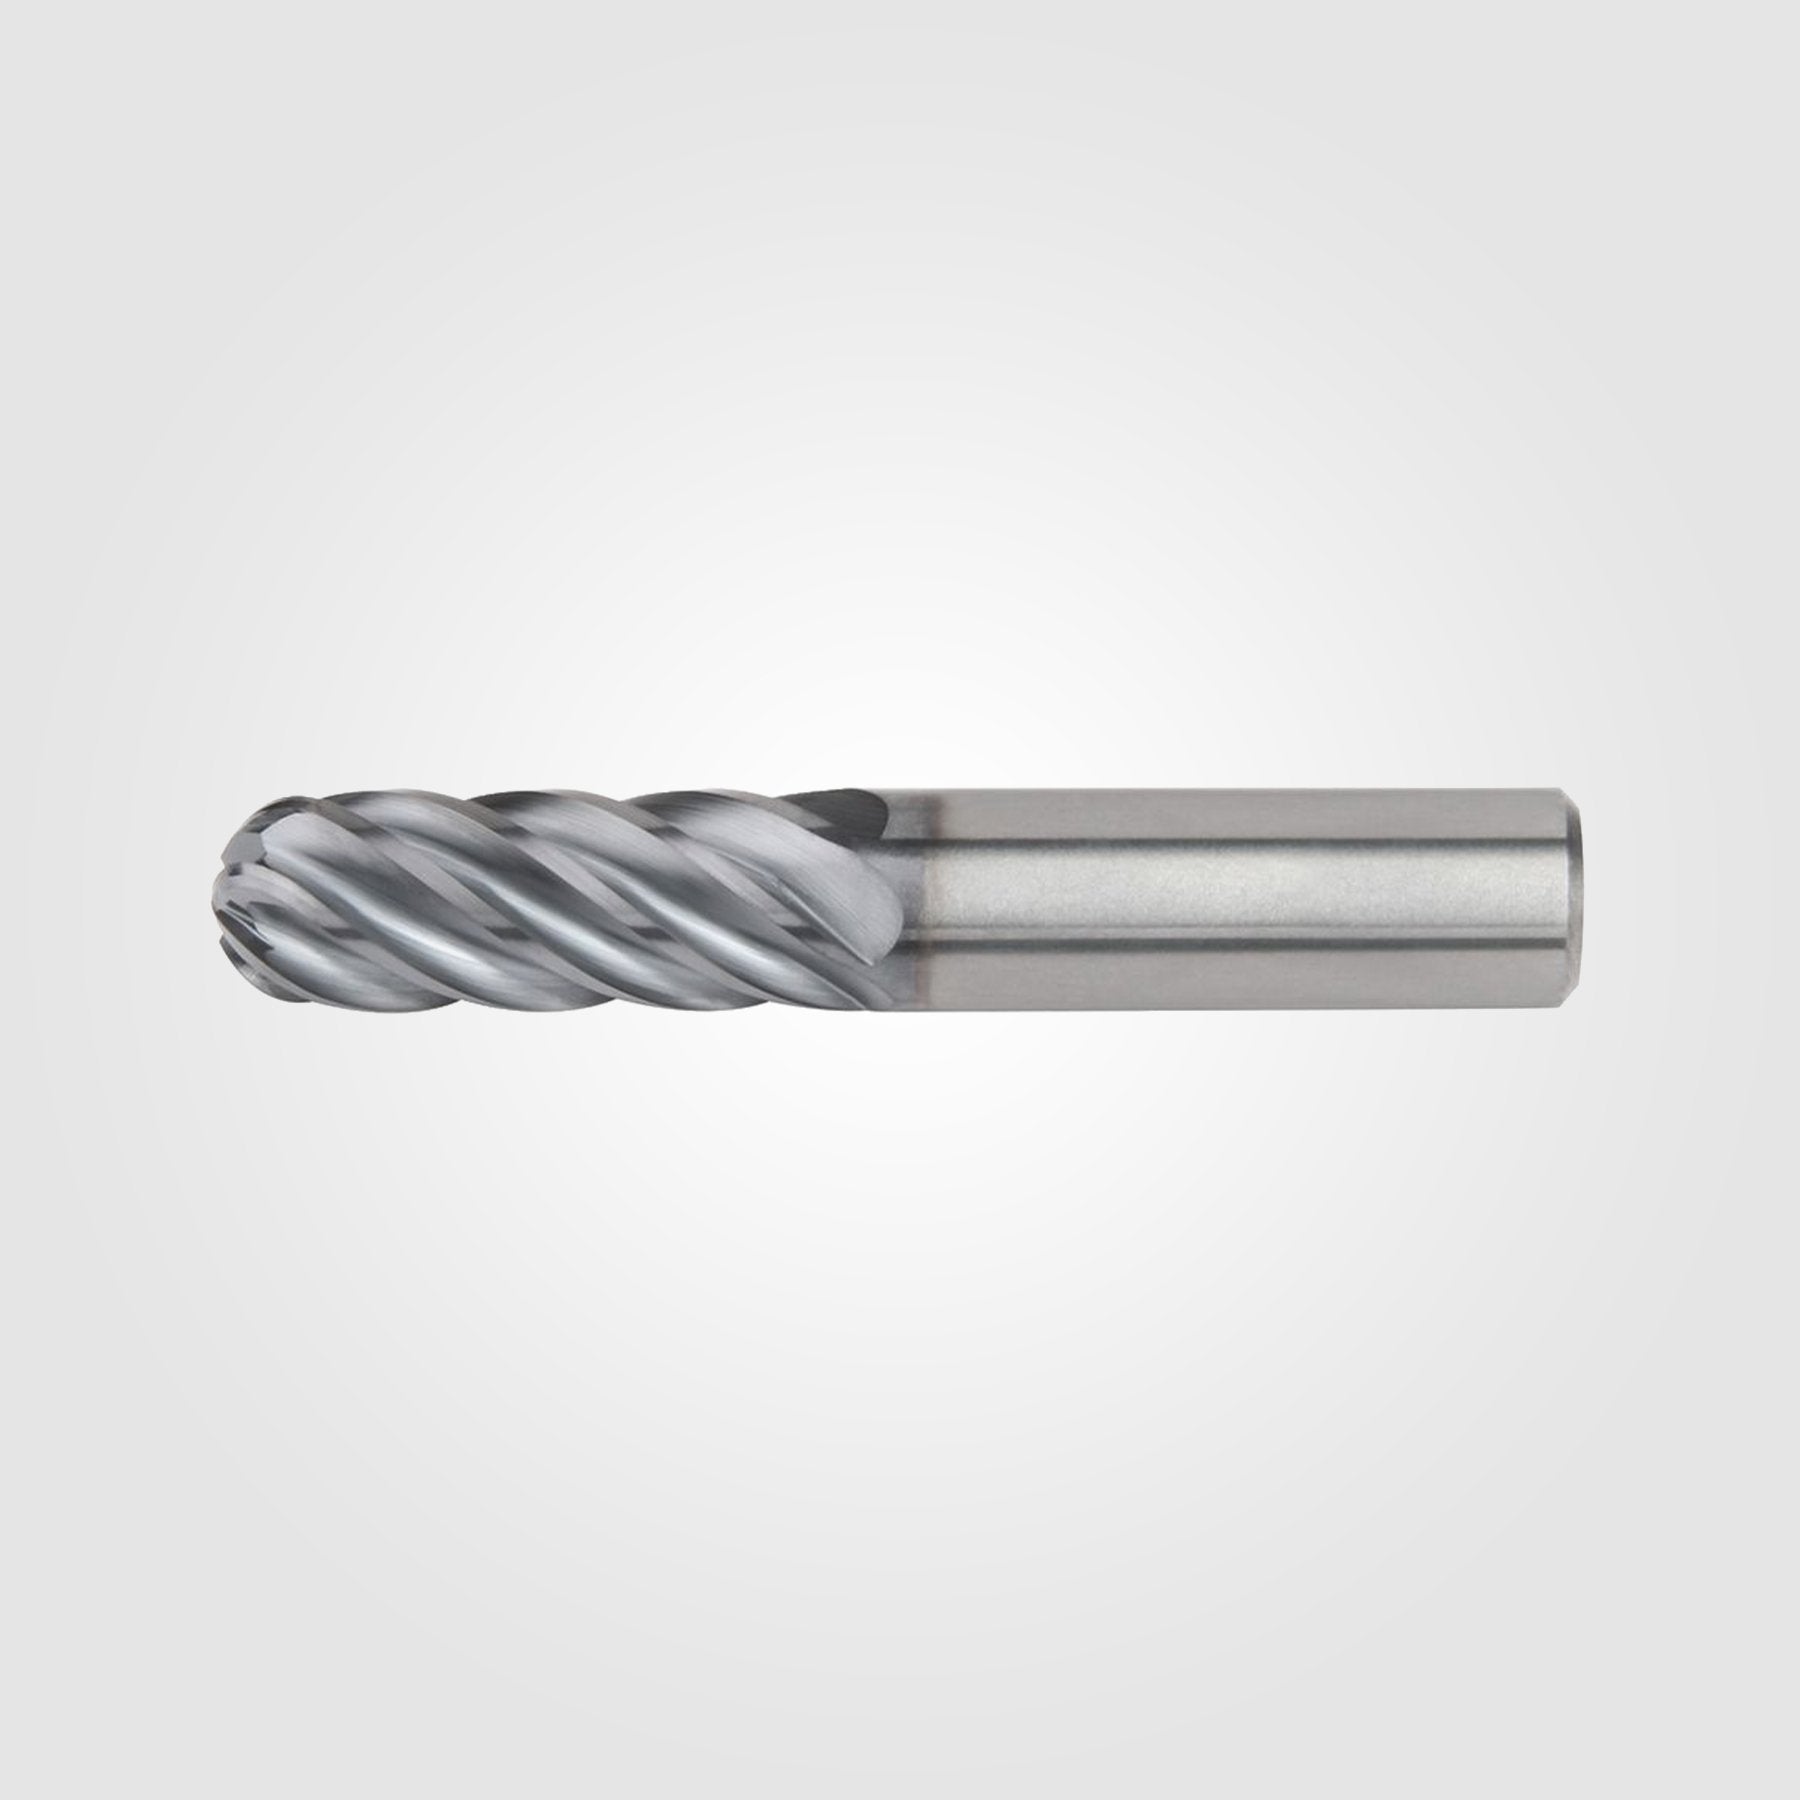 HARVI III (BALL NOSE AEROSPACE EXPANSION) | 1 1/4" x 1 1/4" x 3" x 6" | 6 FLUTE SOLID CARBIDE ENDMILL | 6114004